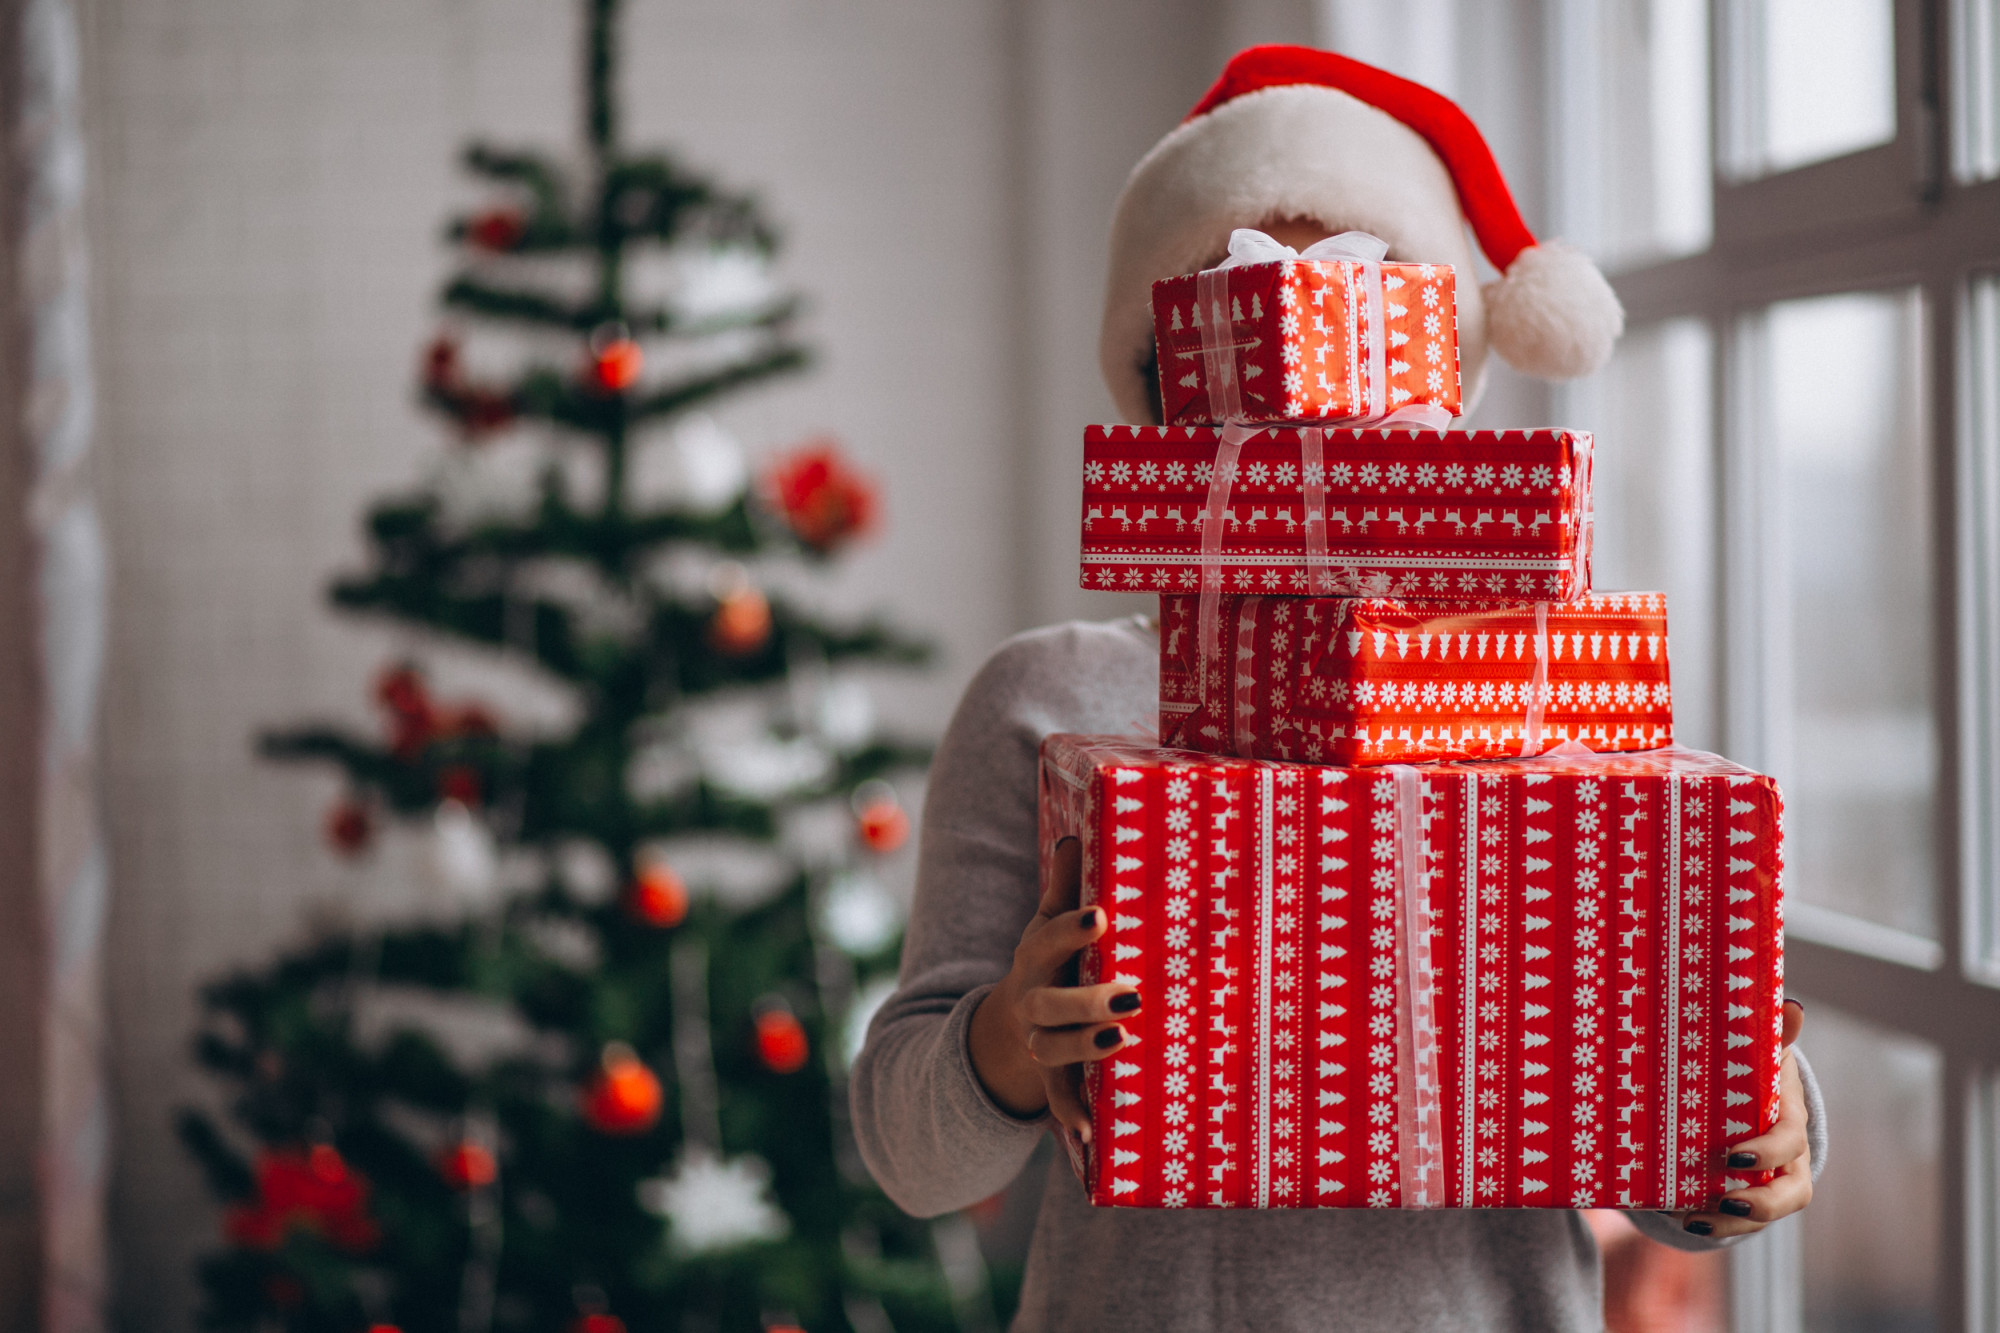 A woman holding a stack of Christmas presents | Source: Freepik